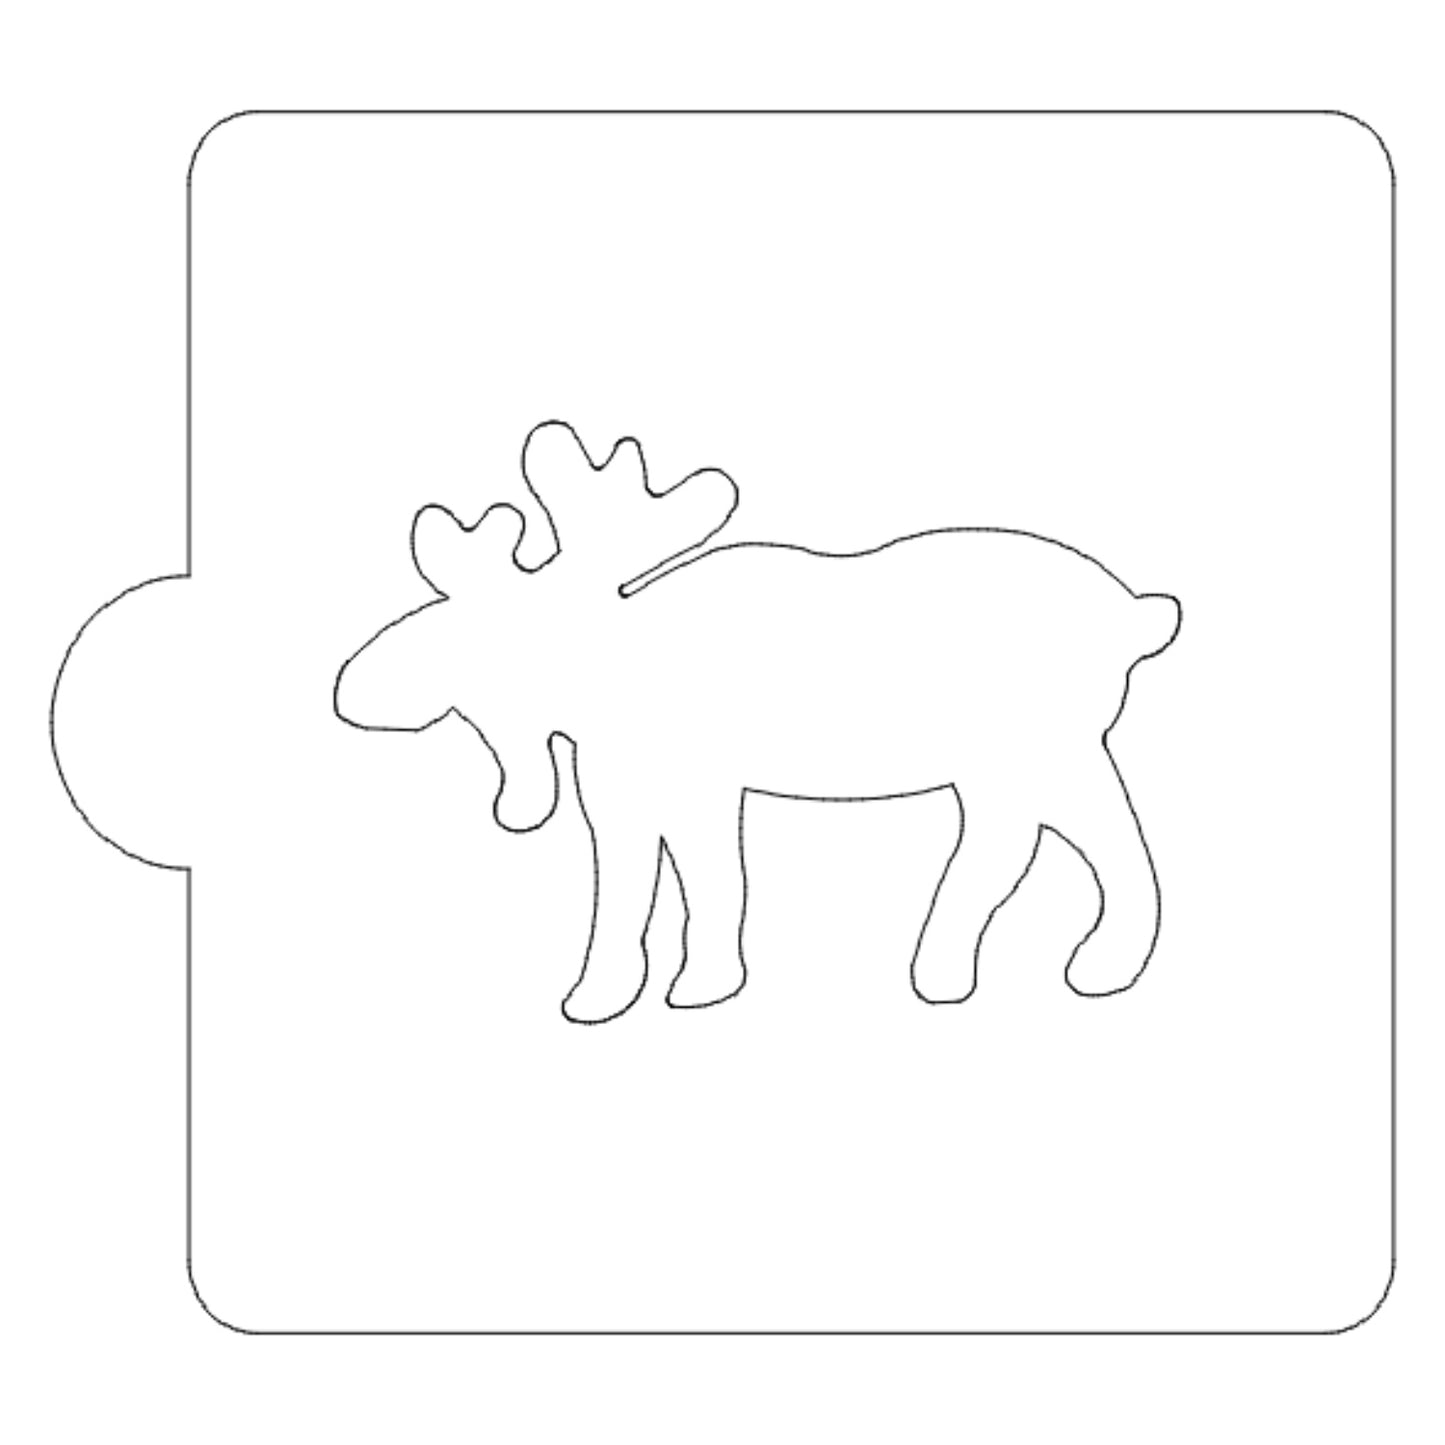 Moose Walking Outline Stencil for Cookies or Cakes USA Made LS94